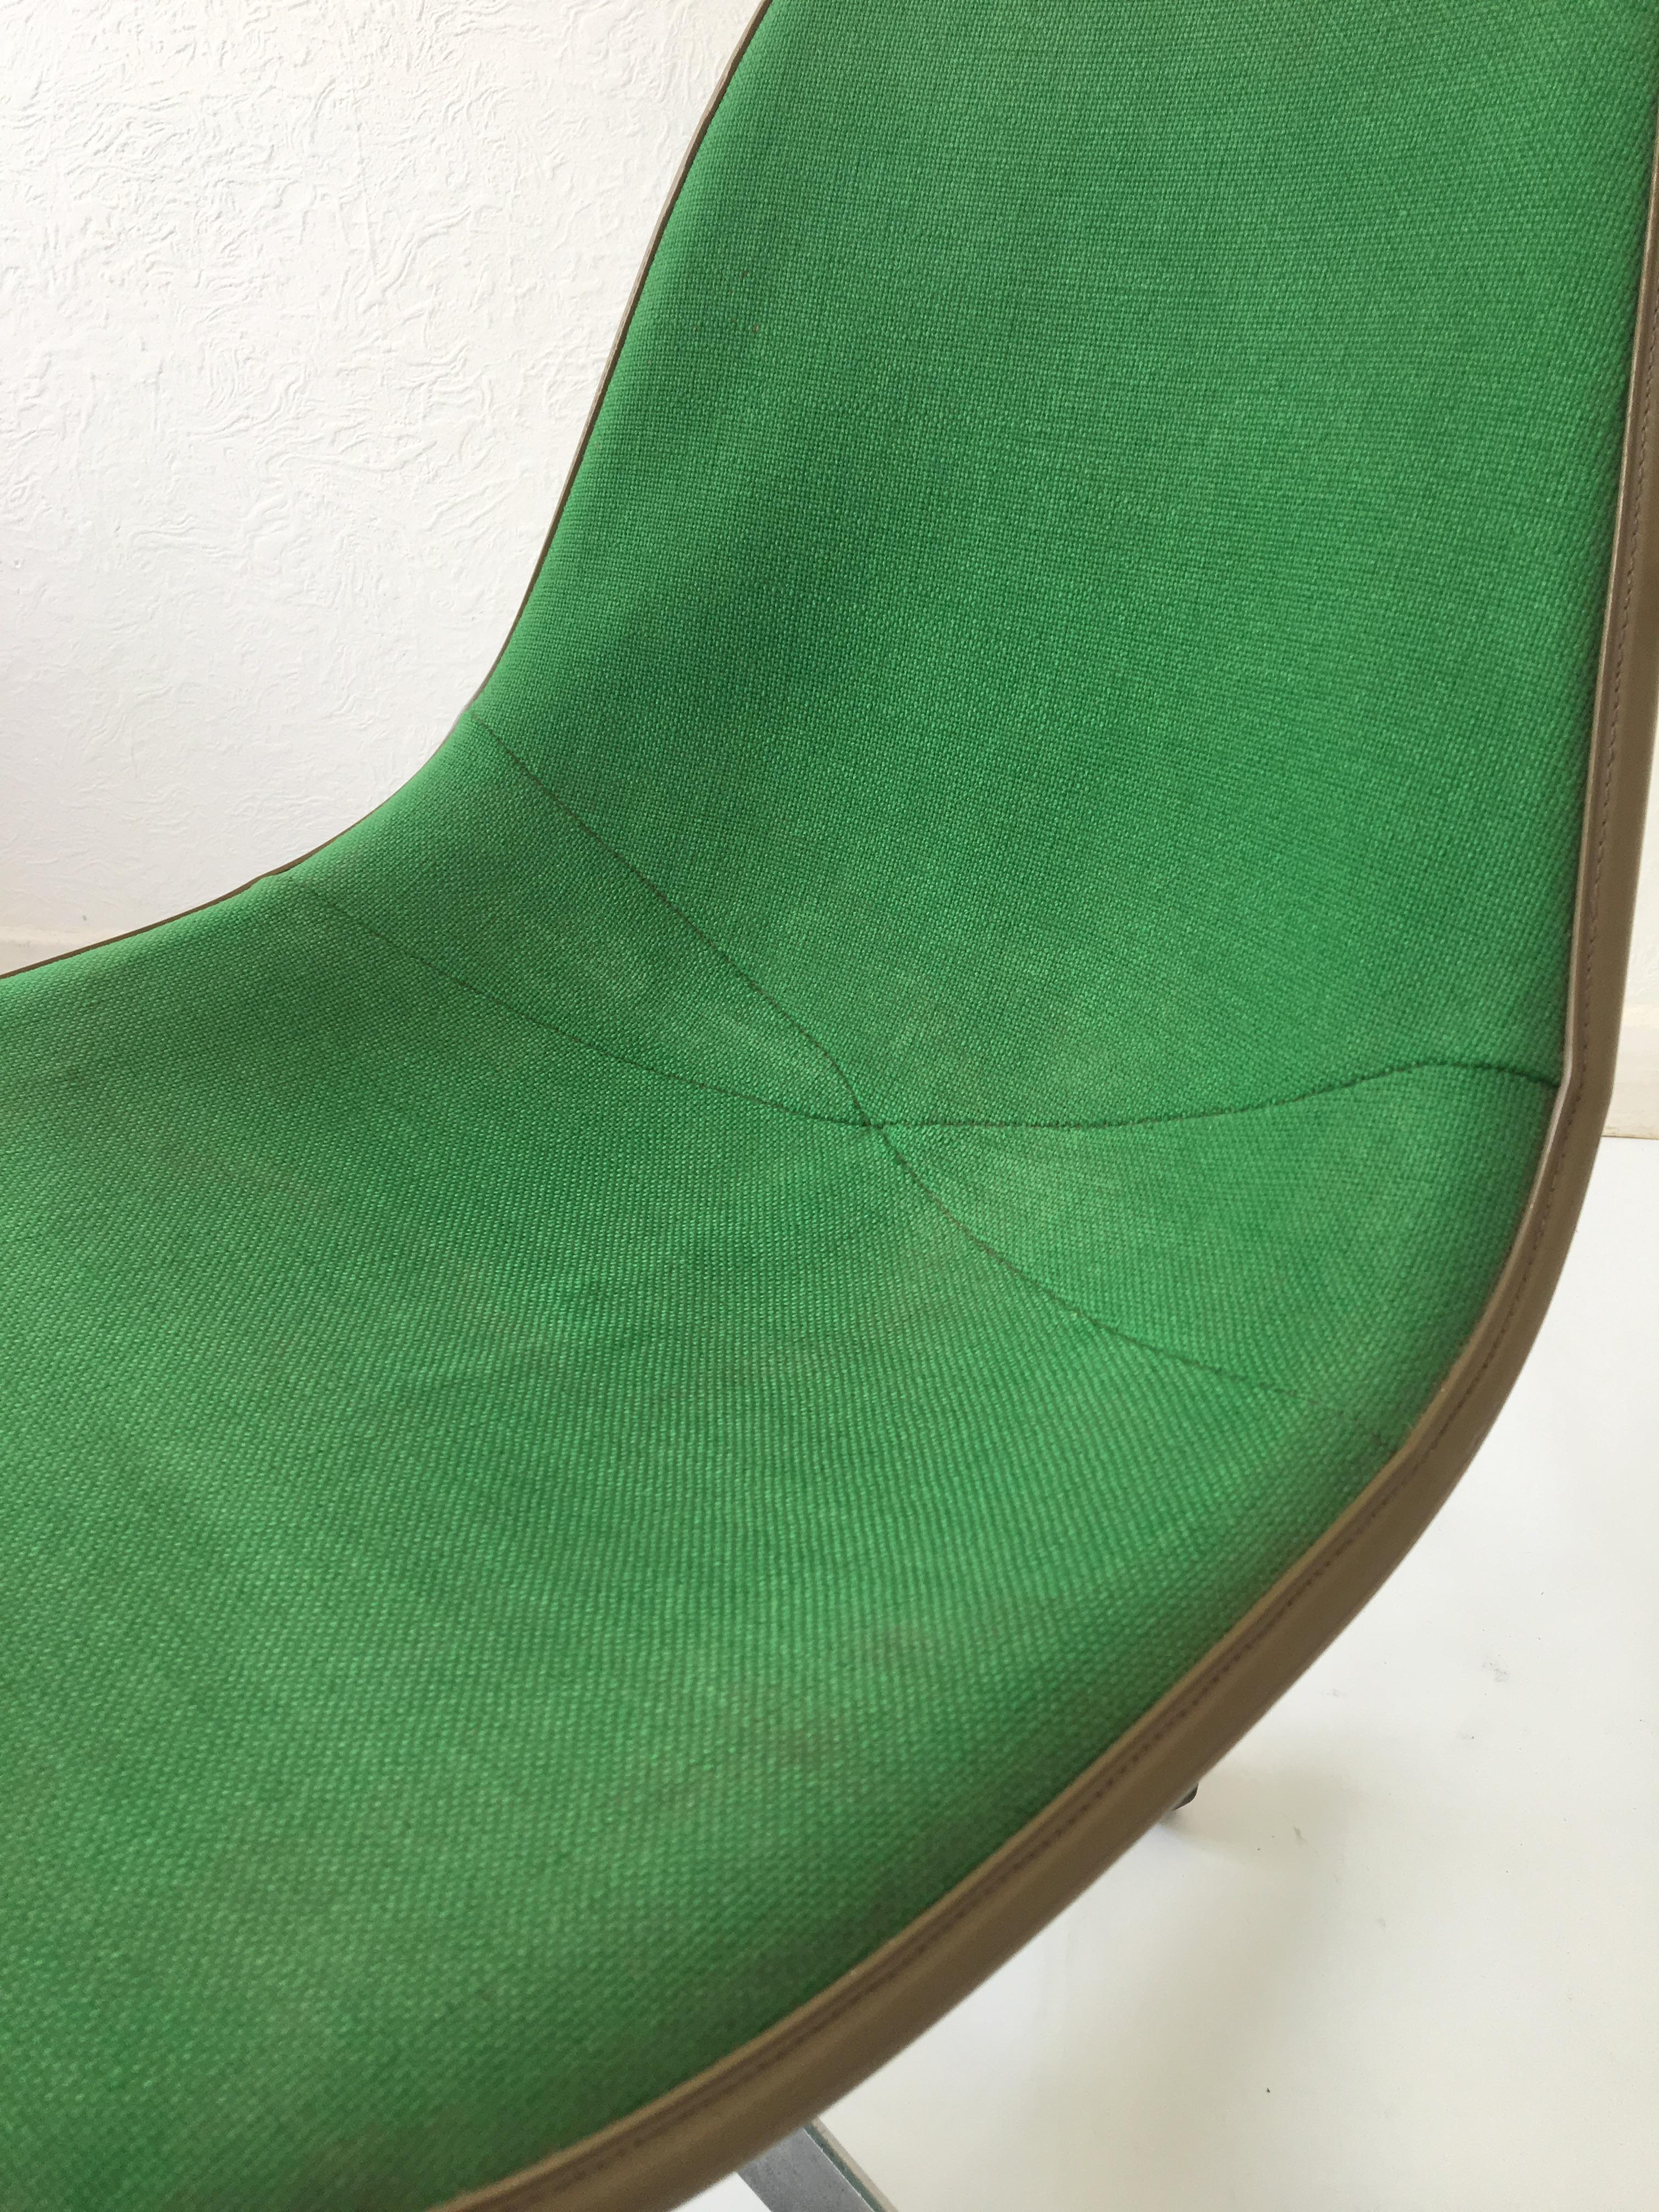 Mid-20th Century Midcentury Green, Eames Fibreglass PSC Swivel Chair for Herman Miller circa 1960